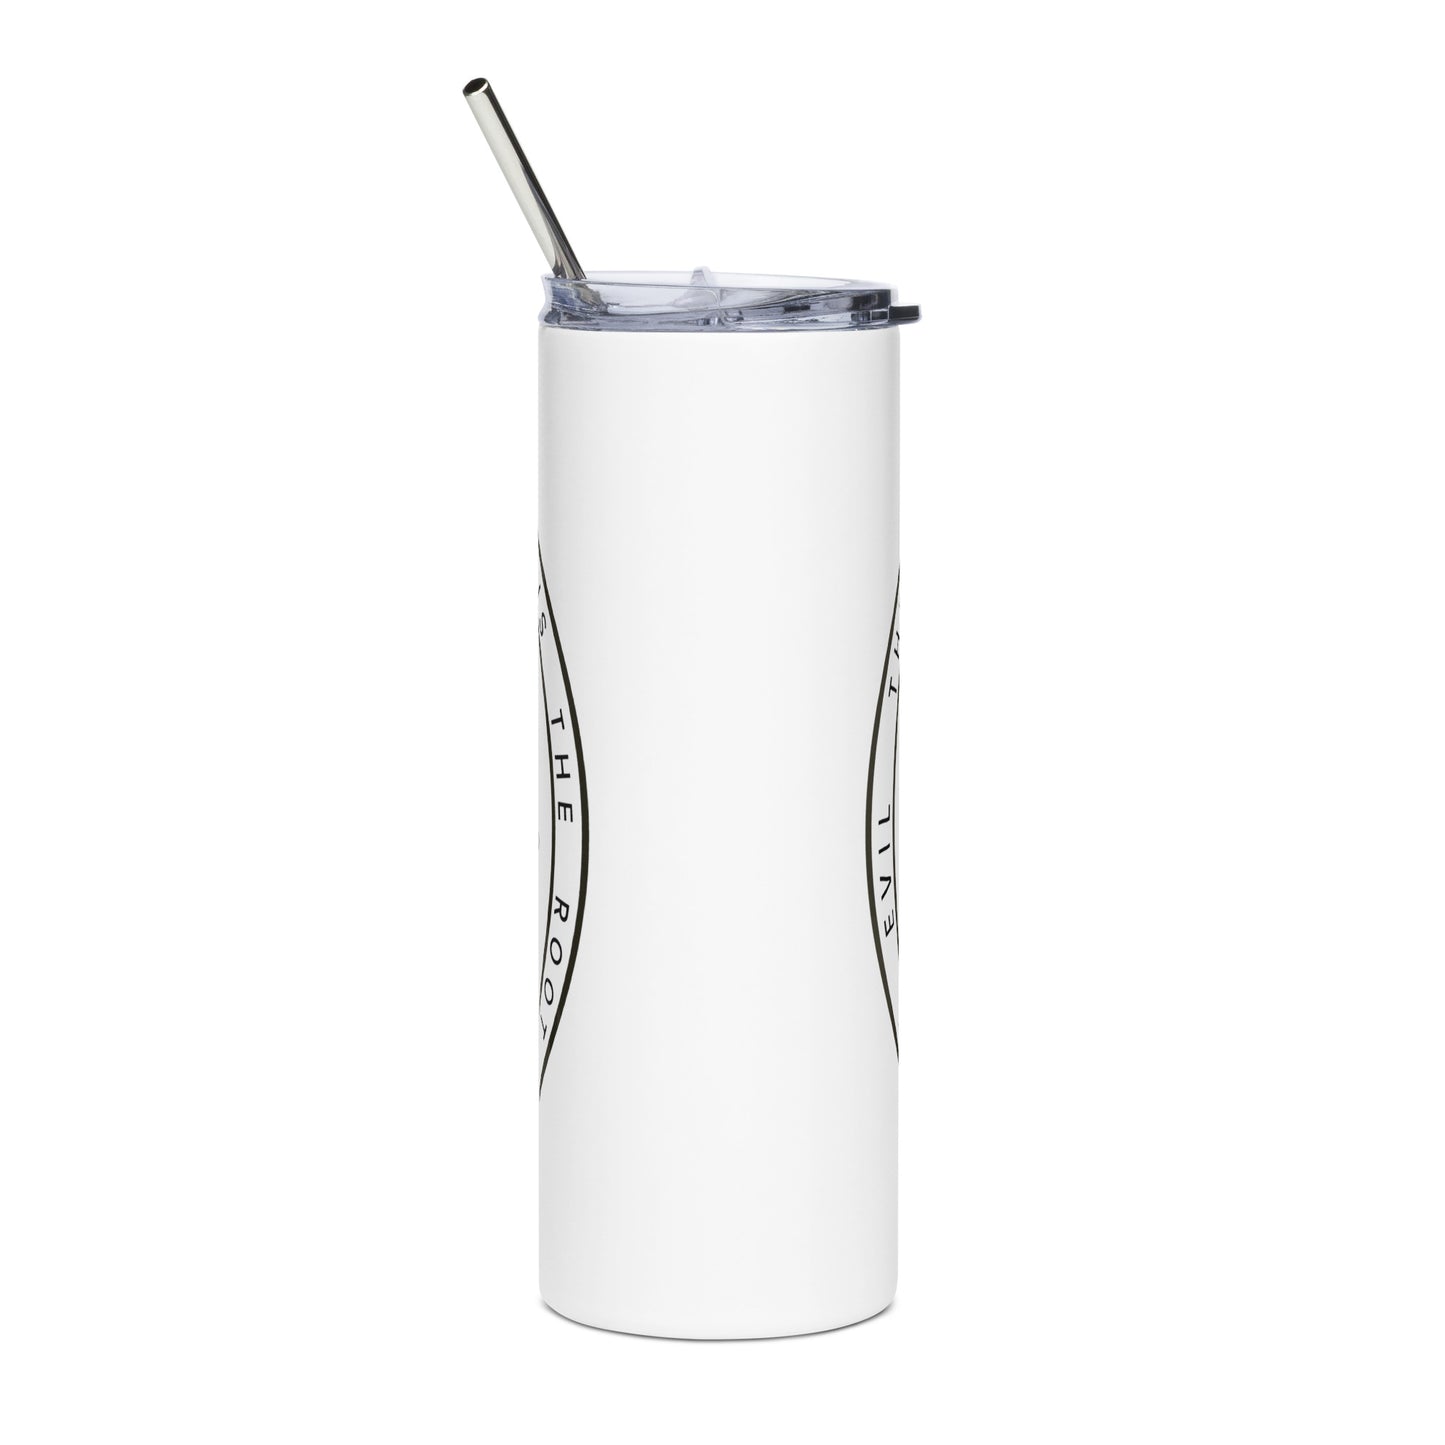 The Love of Money Stainless Steel Tumbler